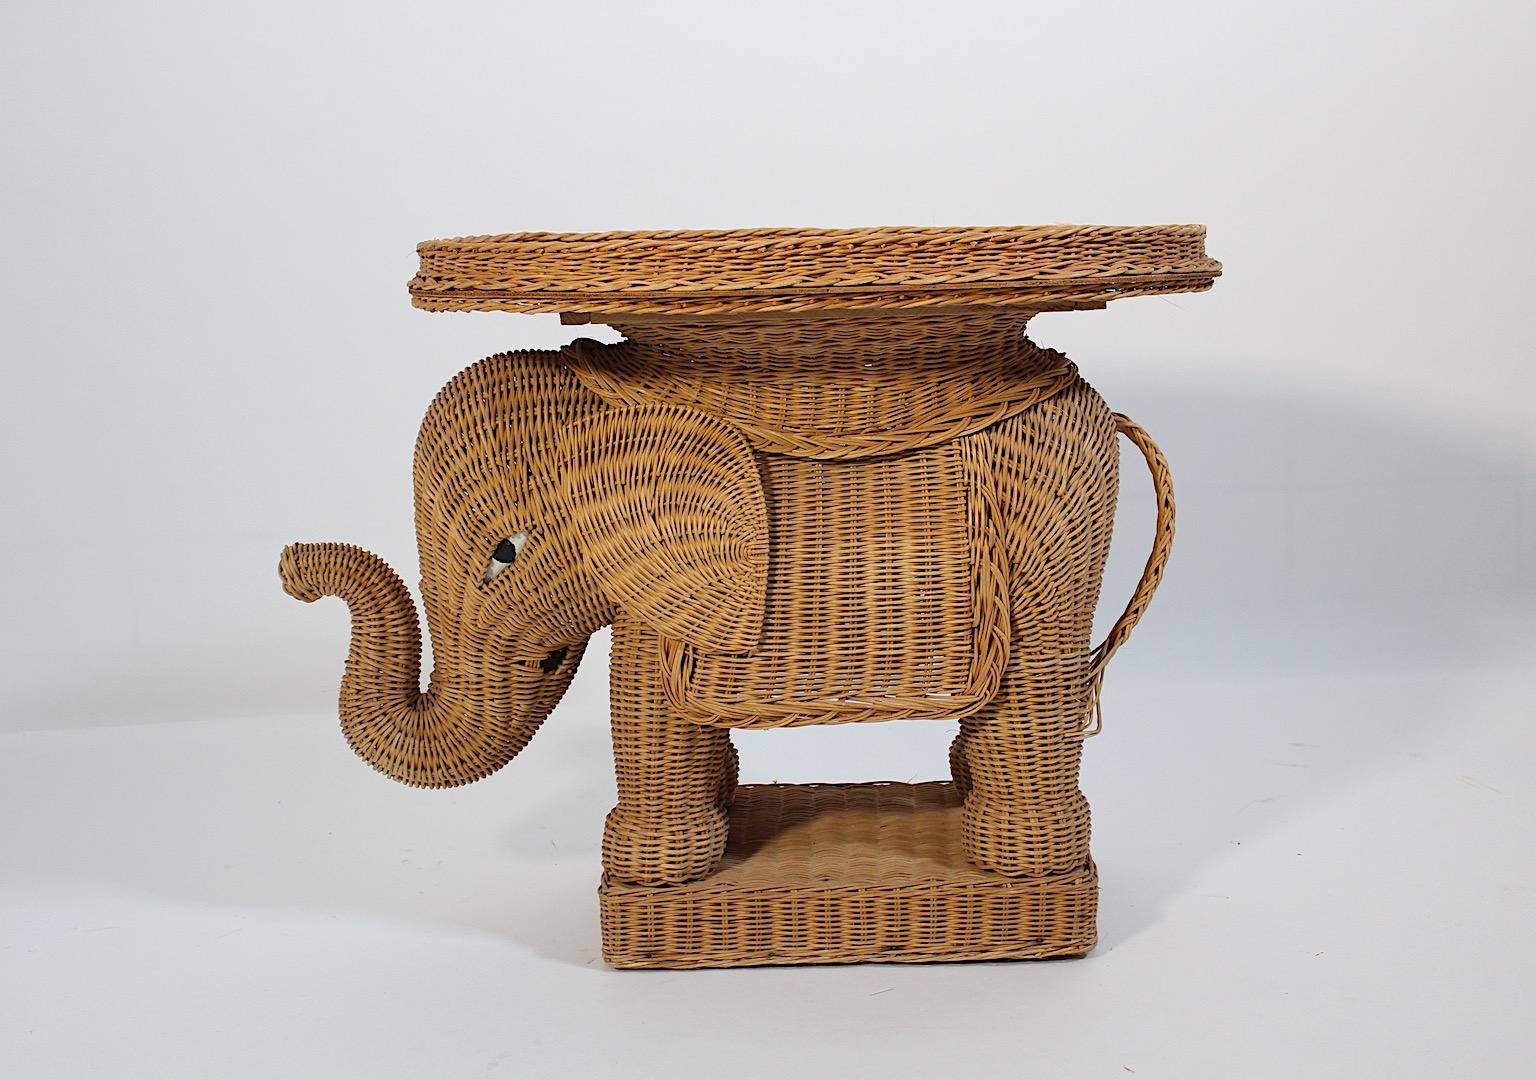 Organic Modern vintage side table or tray table or flower table elephant like from woven rattan and reinforced with plywood underneath.
A charming side table or tray table shaped like an elephant 1970s.
This elephant features a lovely and smiling